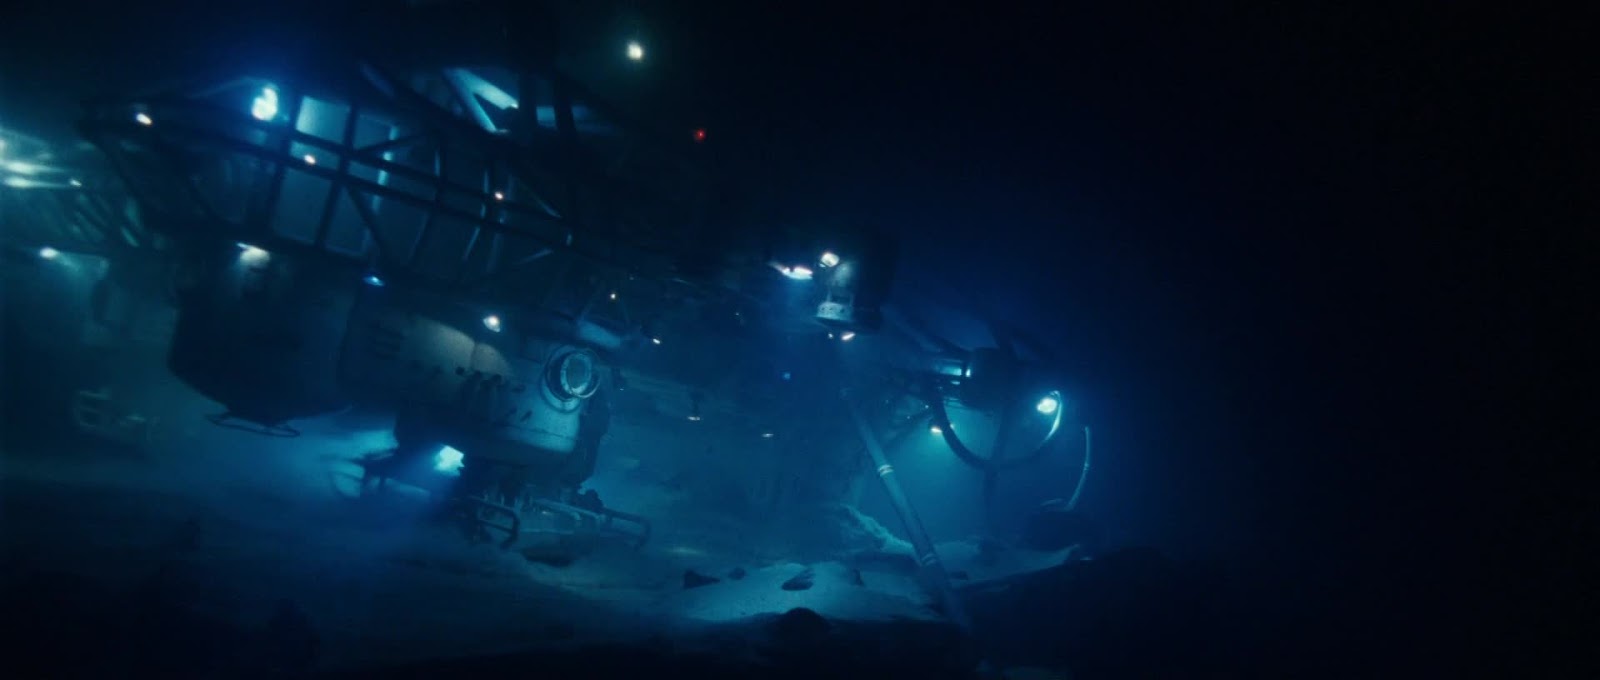 model ships in the cinema: The Abyss 1989 Part 5